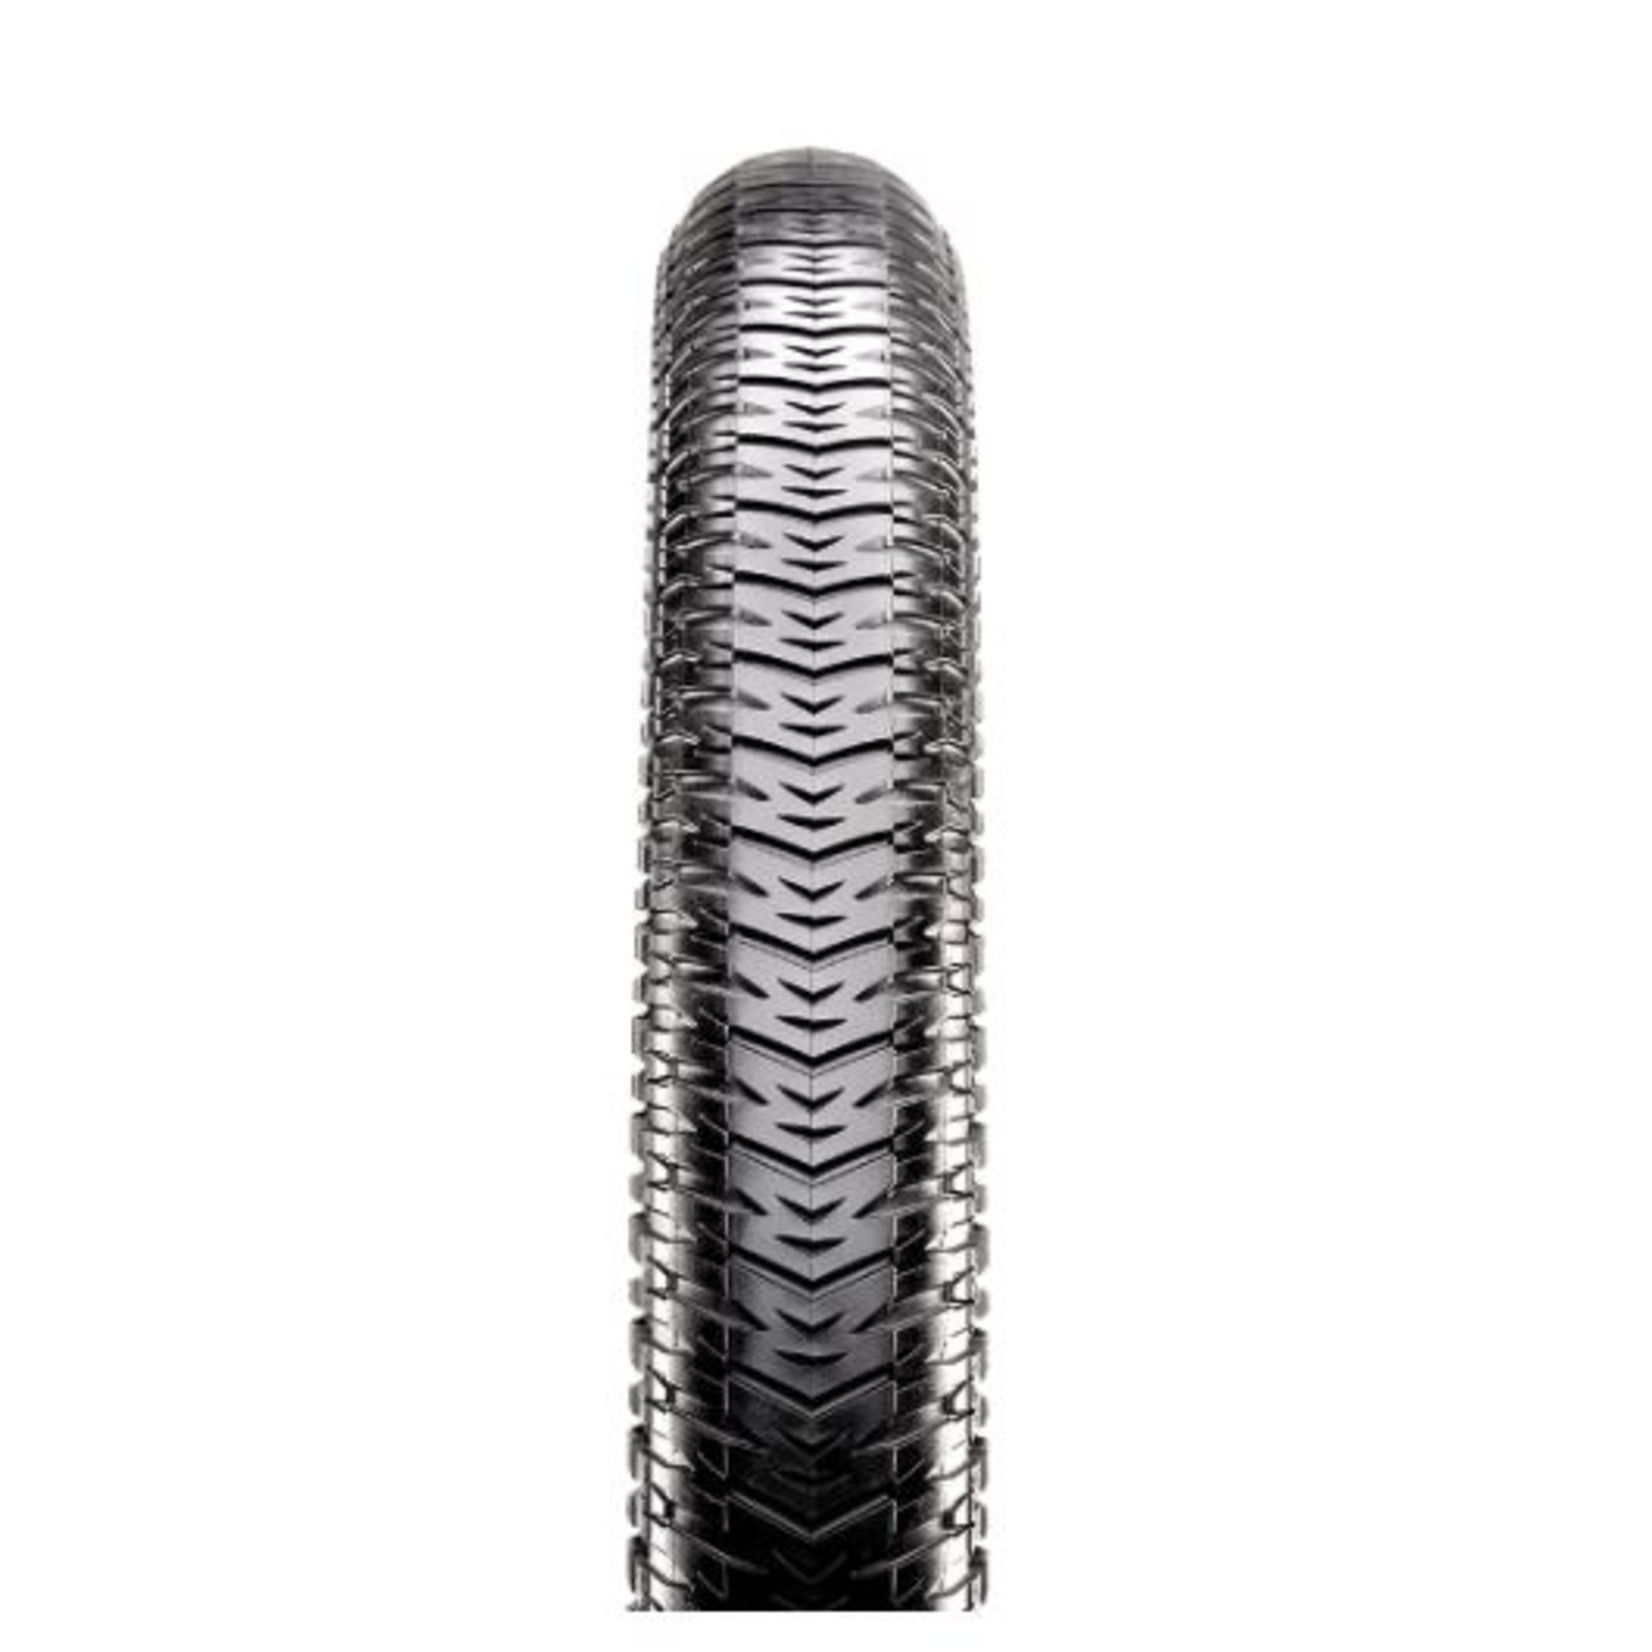 Maxxis Maxxis Drop-The-Hammer (DTH) Tyre - 20 X 1 3/8 - Wirebead 120TPI Silkworm - Pair